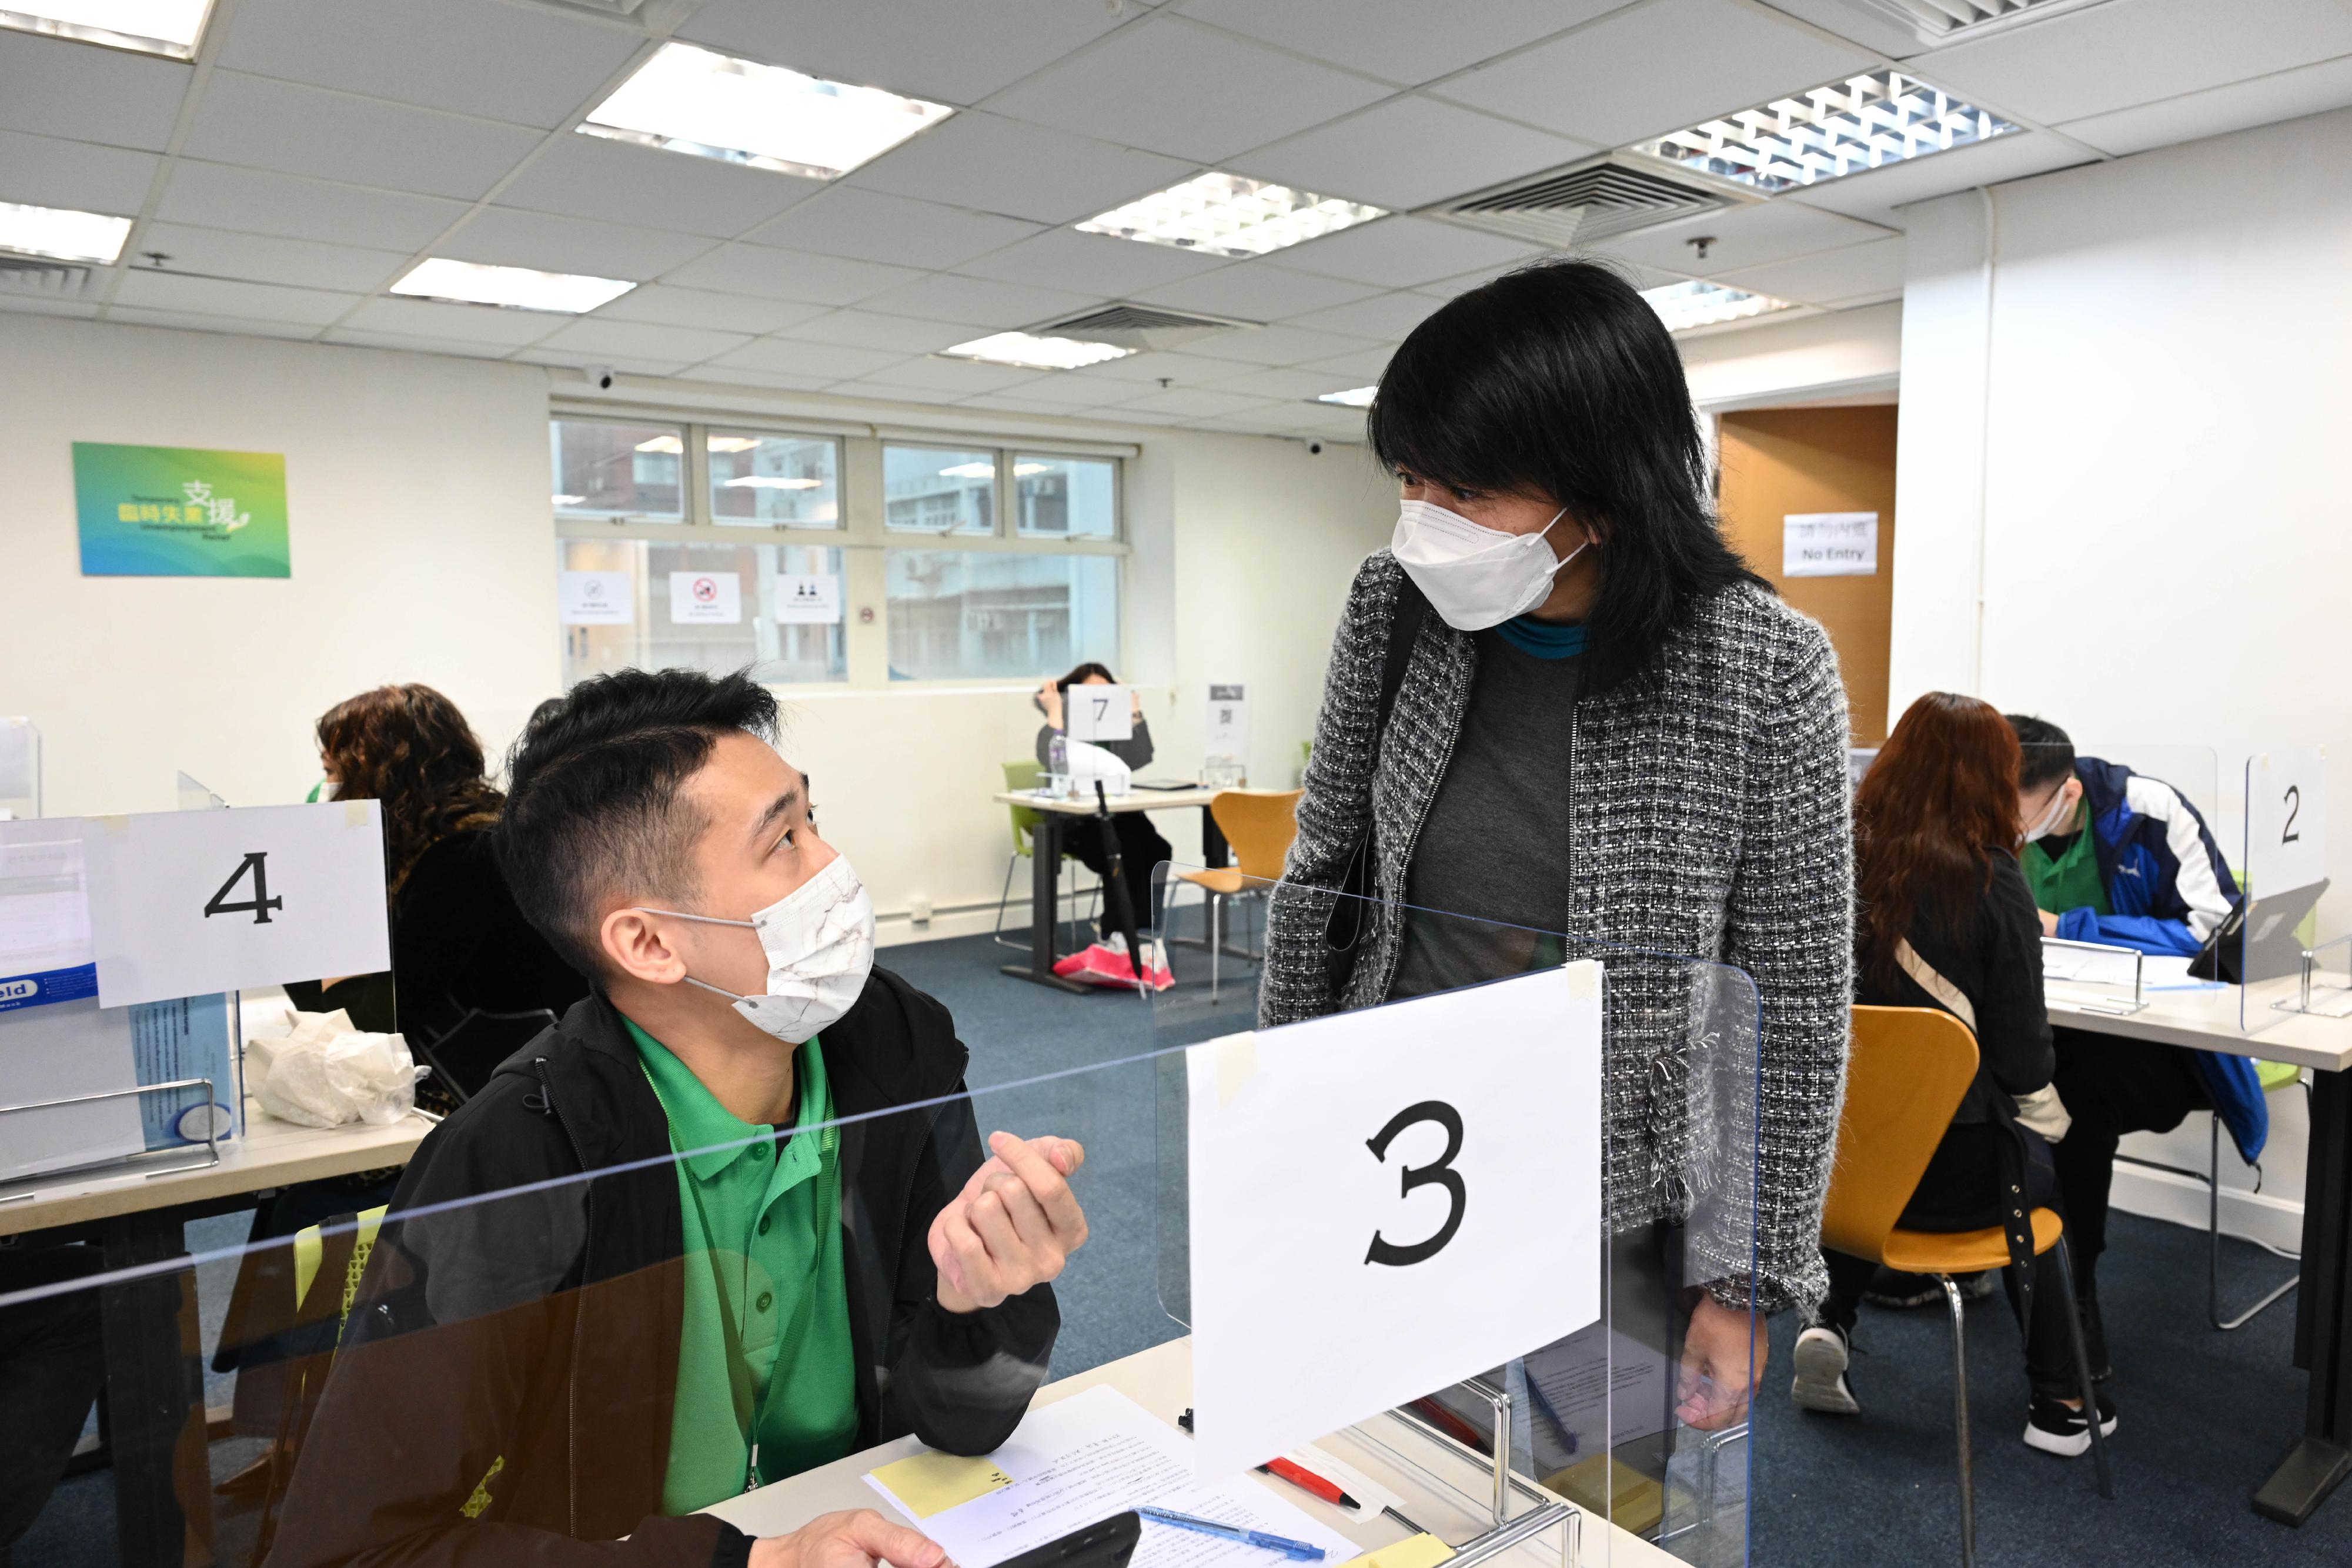 The Temporary Unemployment Relief Scheme (TUR) started off with an overwhelming response on its first day of the three-week application period. Photo shows the Head of the Policy Innovation and Co-ordination Office, Ms Doris Ho (right), today (March 23) visiting one of the service centres of the TUR in North Point to understand its operation.